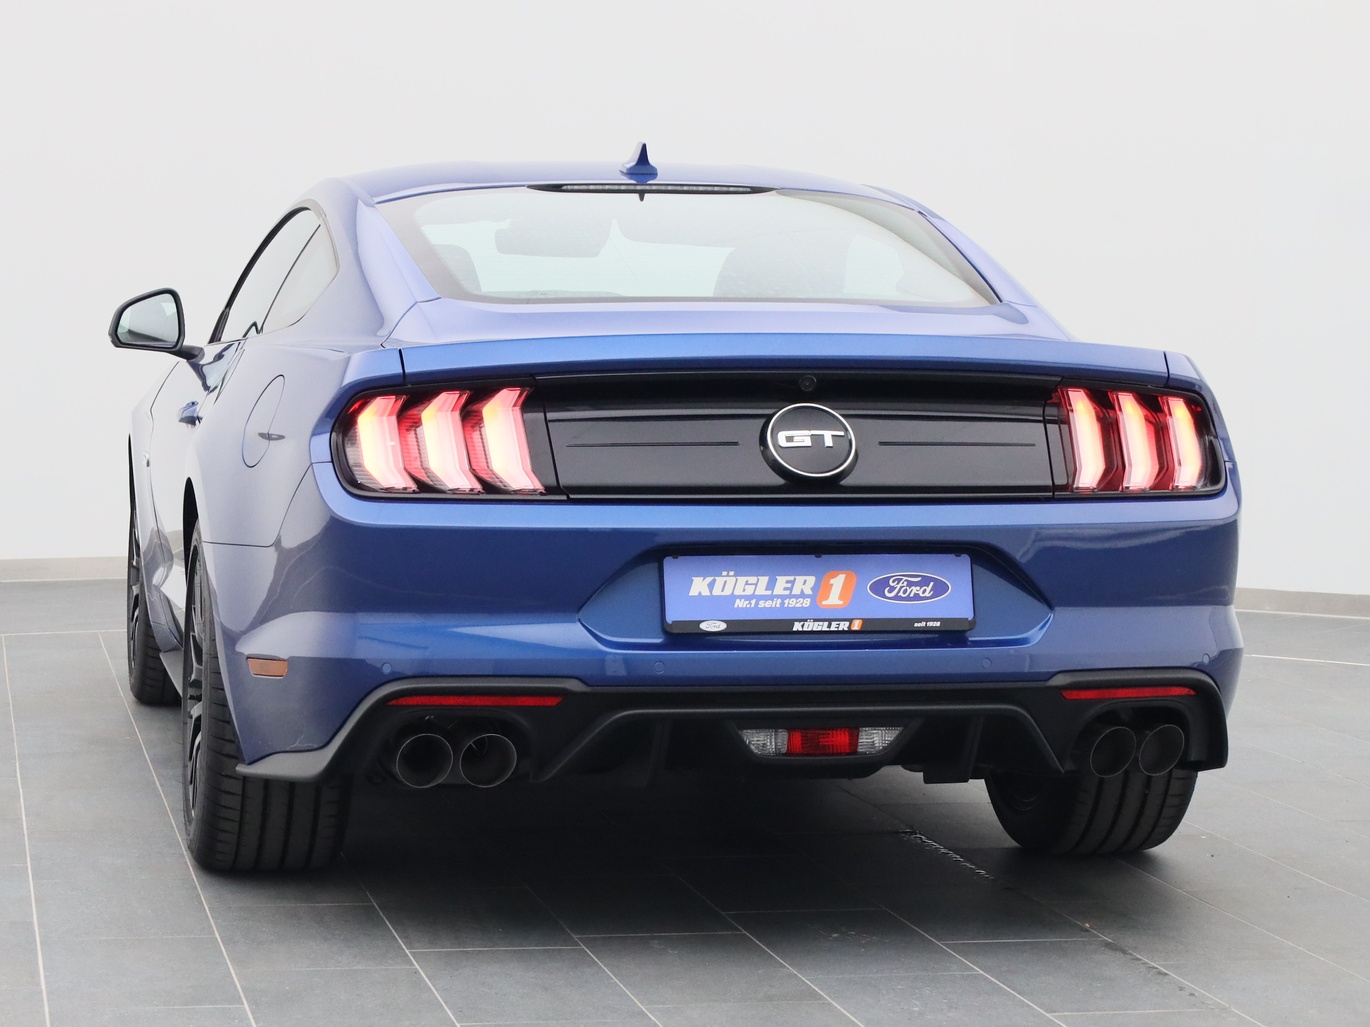  Ford Mustang GT Coupé V8 450PS / Premium 2 / Magne in Atlas Blau 